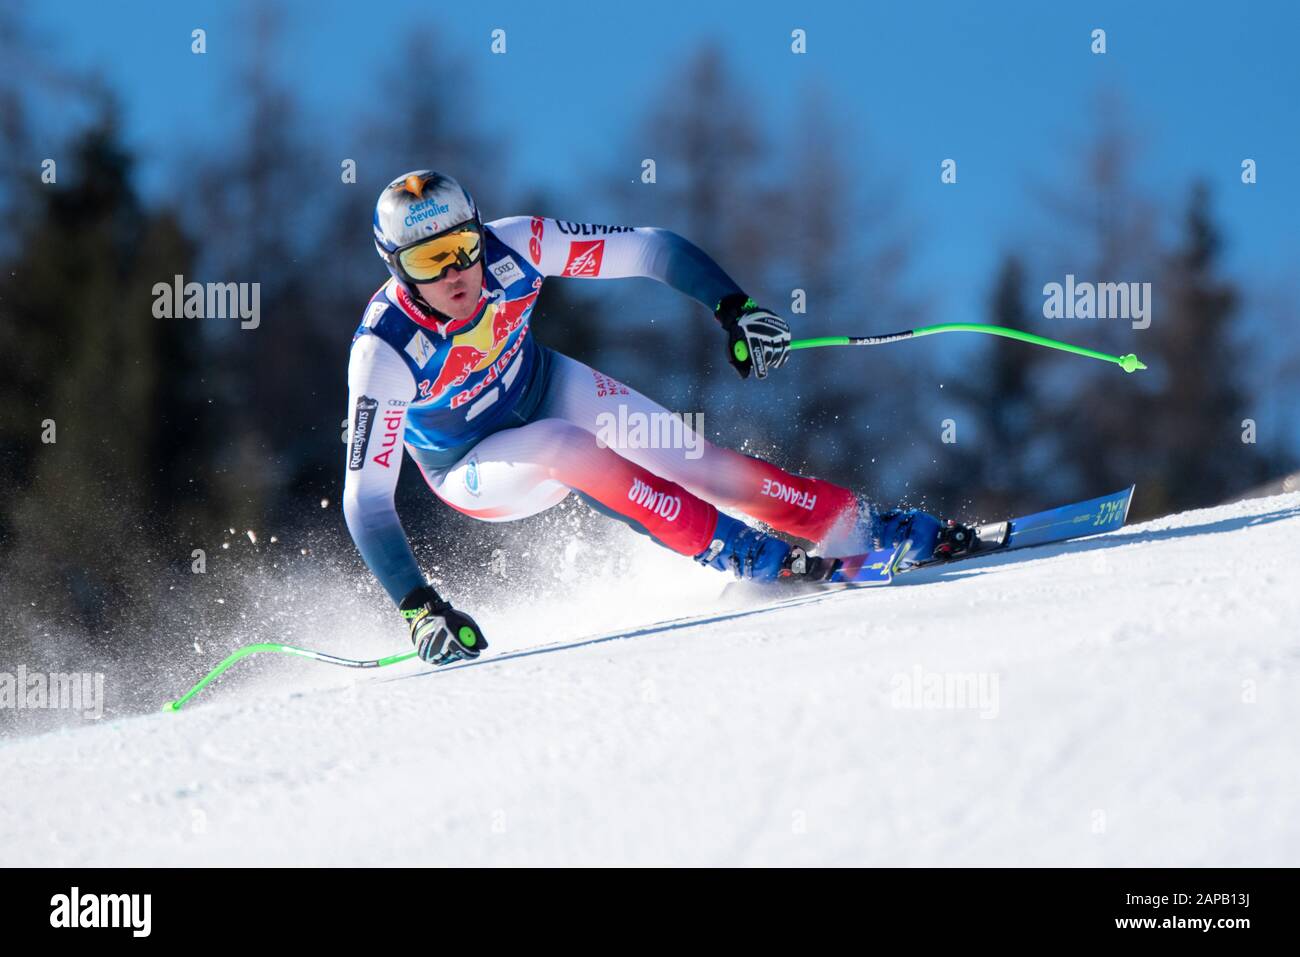 Nils Allegre of France at the Ski Alpin: 80. Hahnenkamm Race 2020 - Audi FIS Alpine Ski World Cup - Men's Downhill Training at the Streif on January 22, 2020 in Kitzbuehel, AUSTRIA. (Photo by Horst Ettensberger/ESPA-Images) Stock Photo